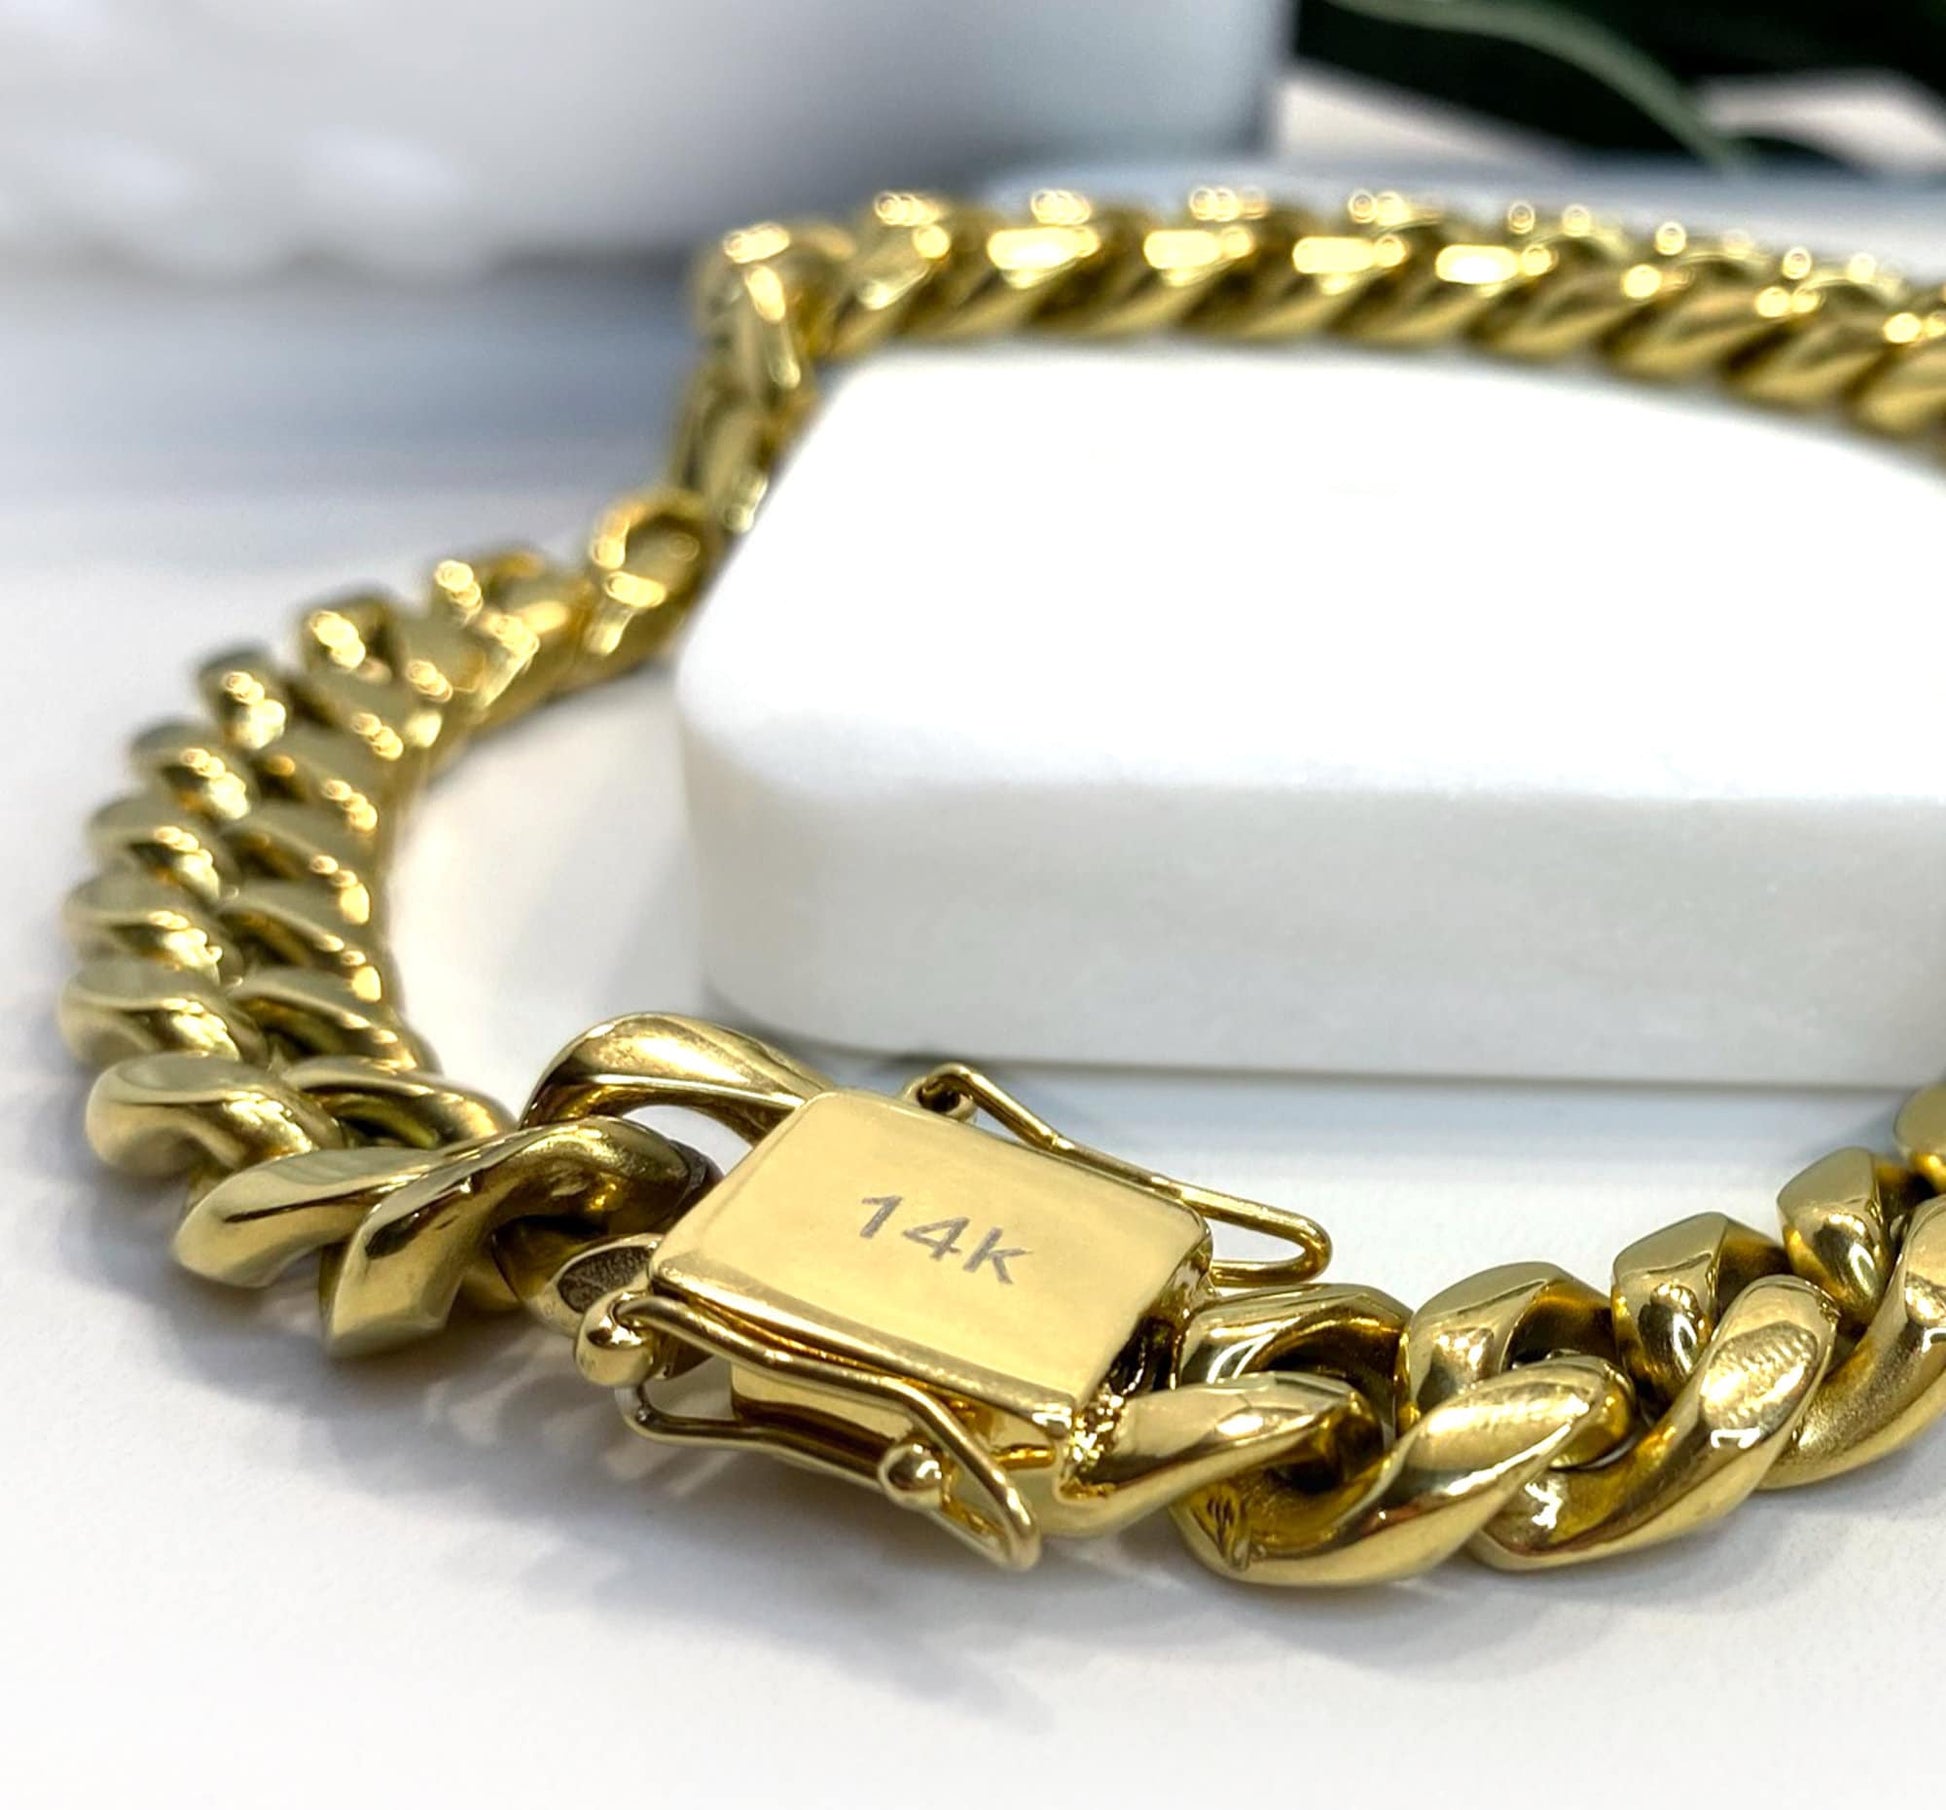 14mm Miami Cuban Link Bracelet In 14k Gold Filled Featuring Double Safety Lock Box Clasp, Unisex Curb Chain, Wholesale Jewelry Supplies